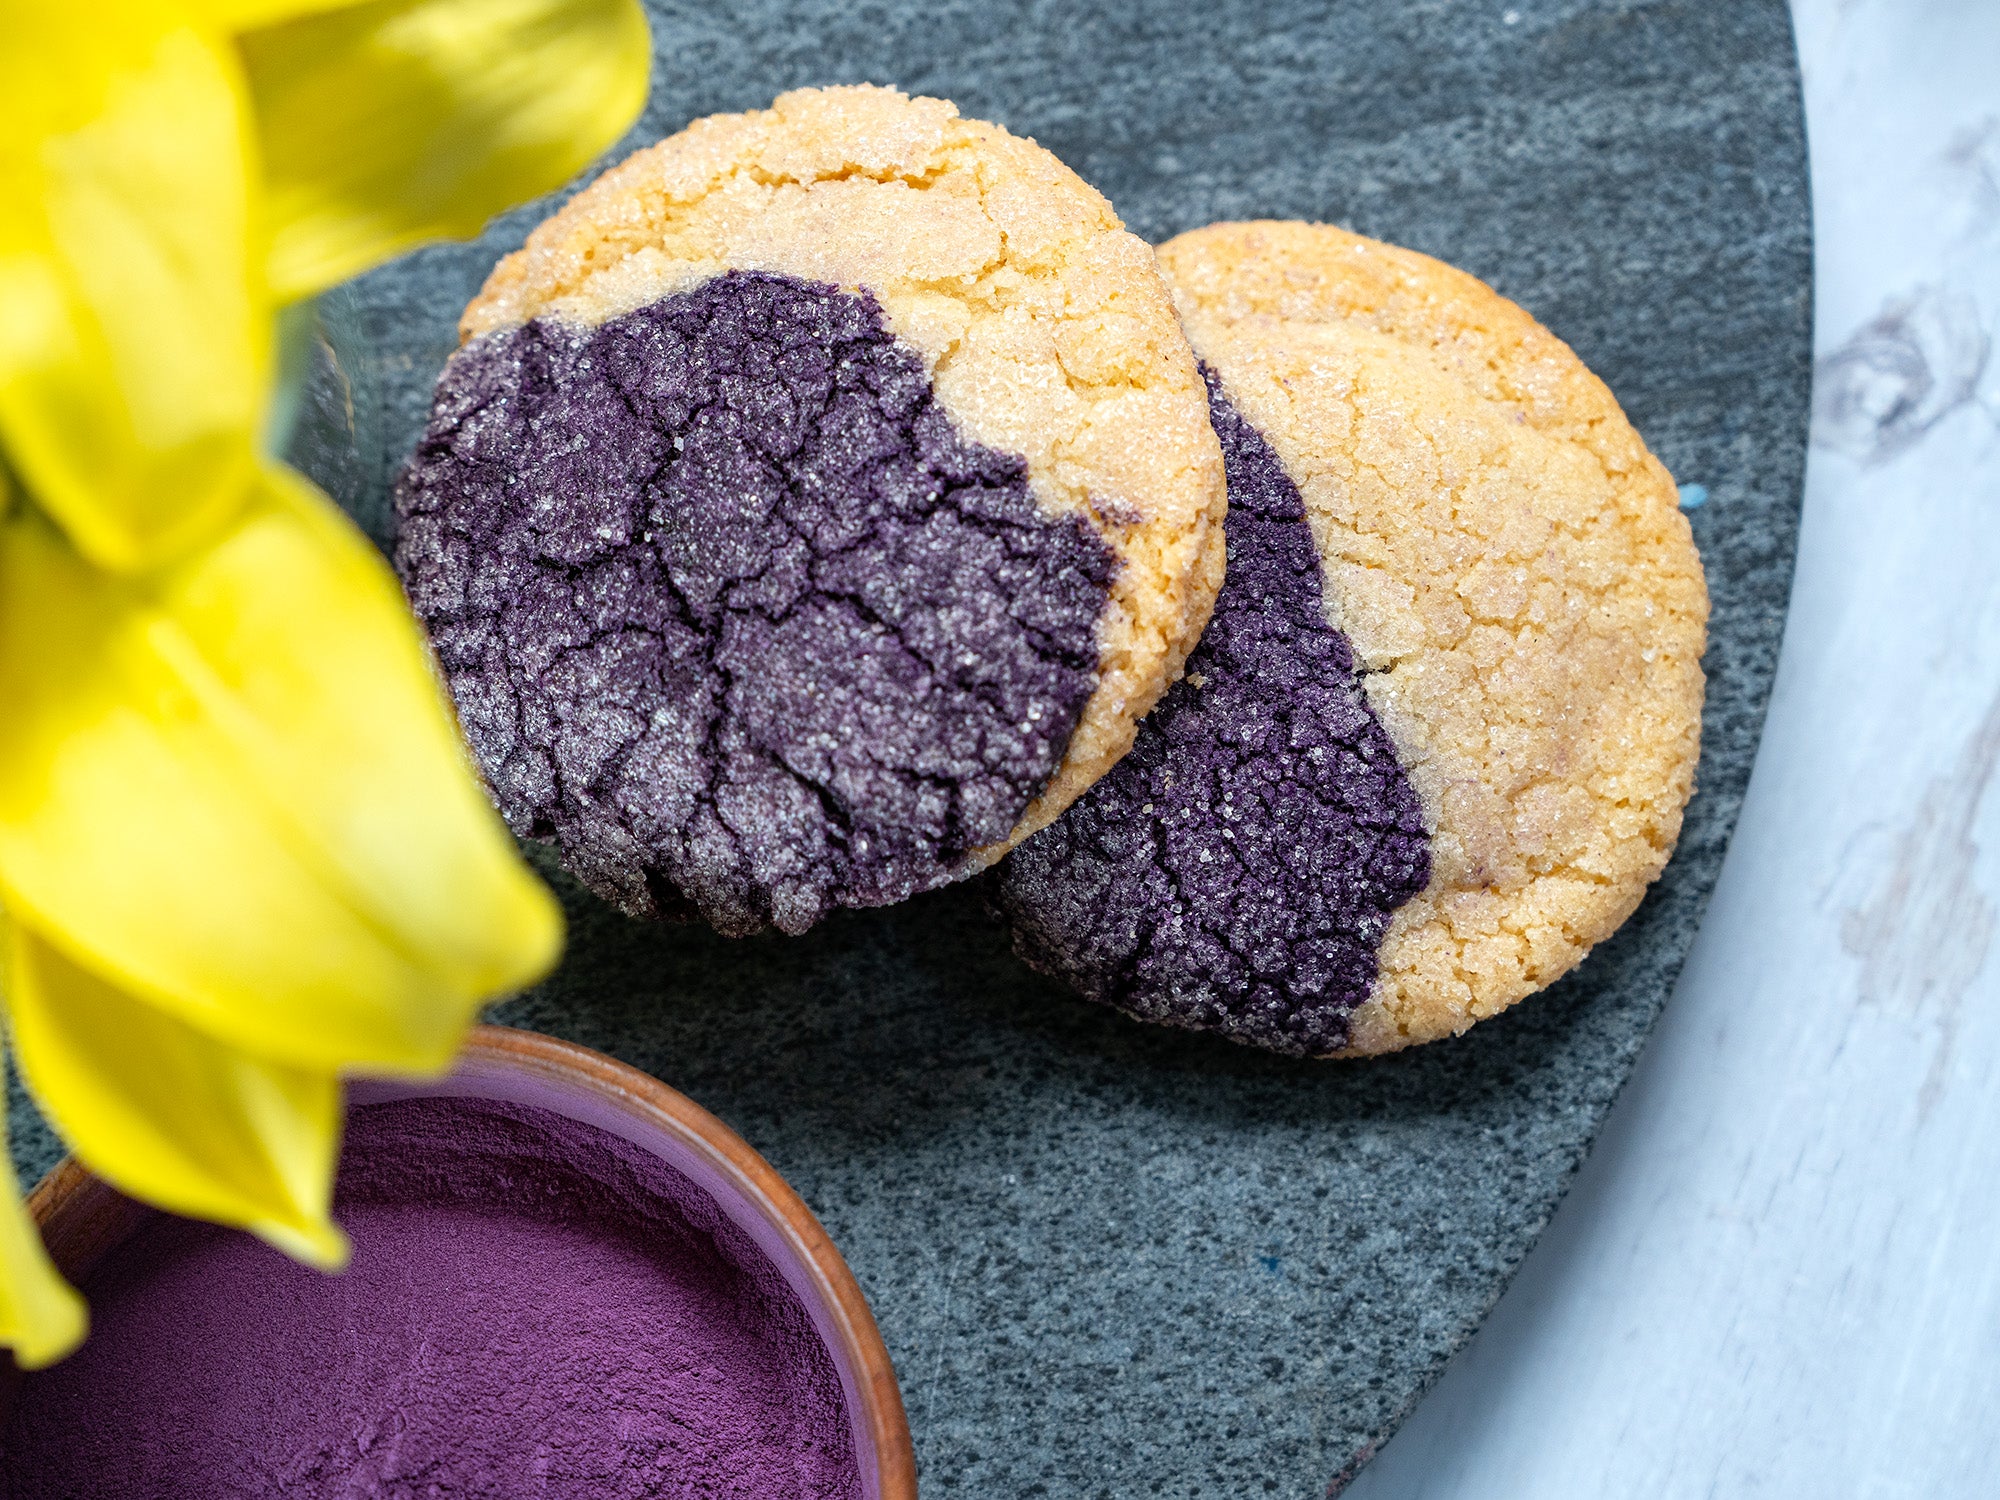 A top-down view of two purple and tan sugar cookies peeking out from beneath the petals of a yellow flower.